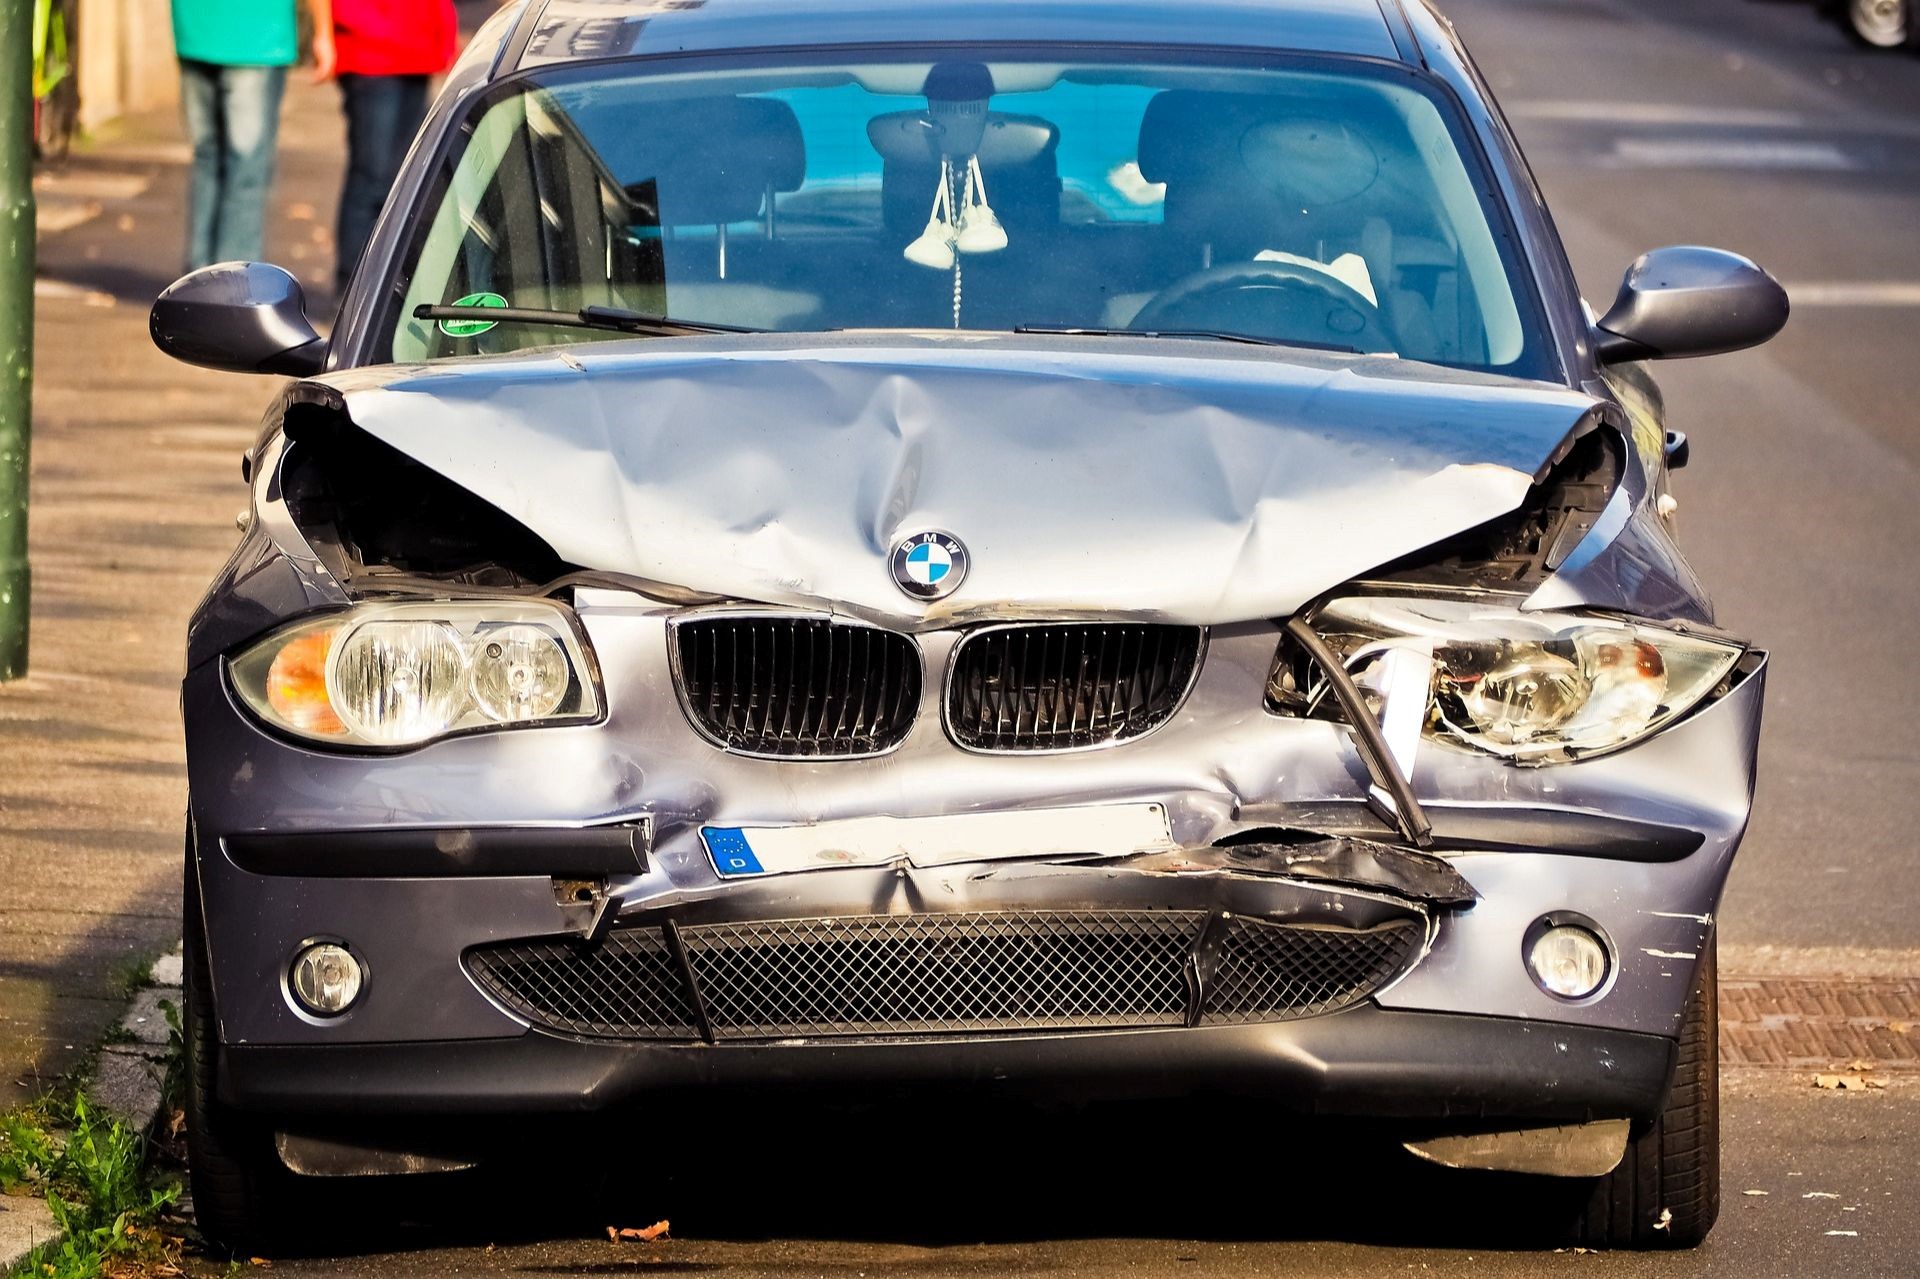 What Should You Do After Being Involved in a Car Accident?